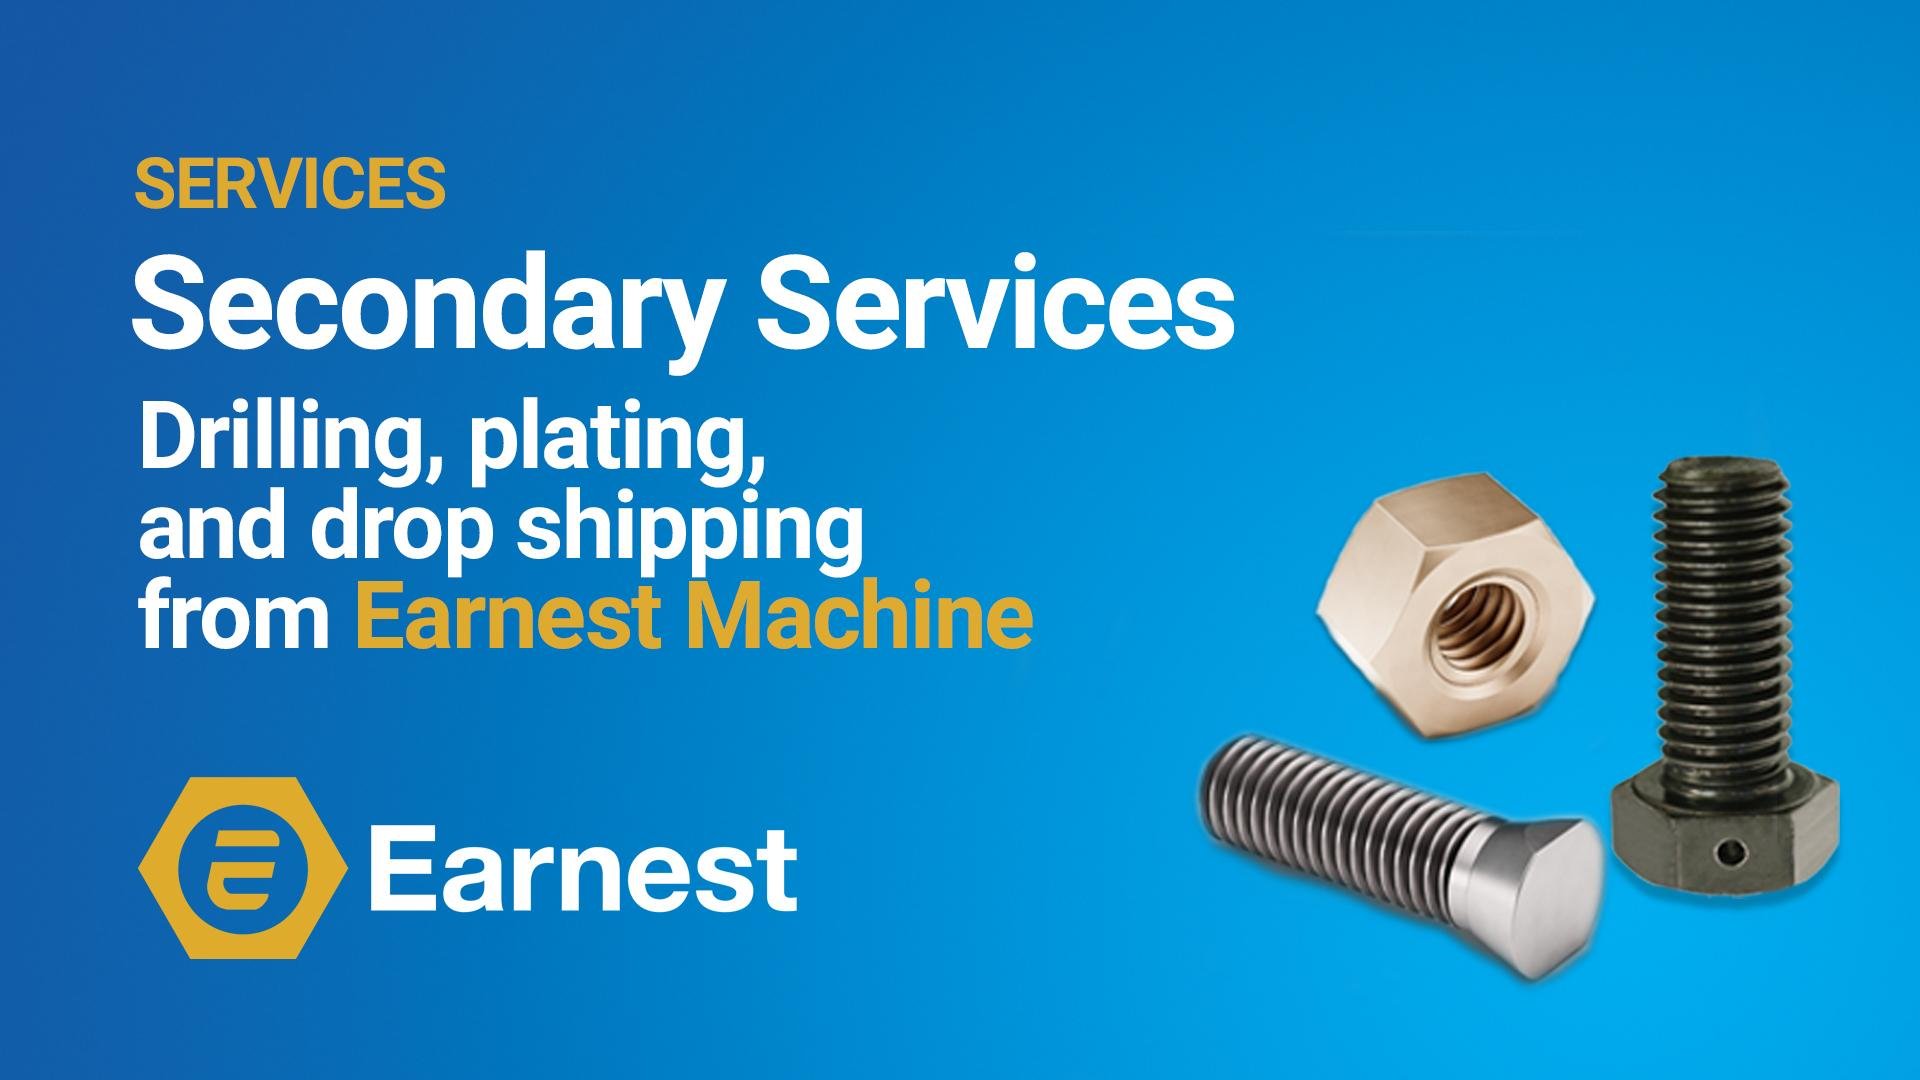 Earnest Machine Secondary Services